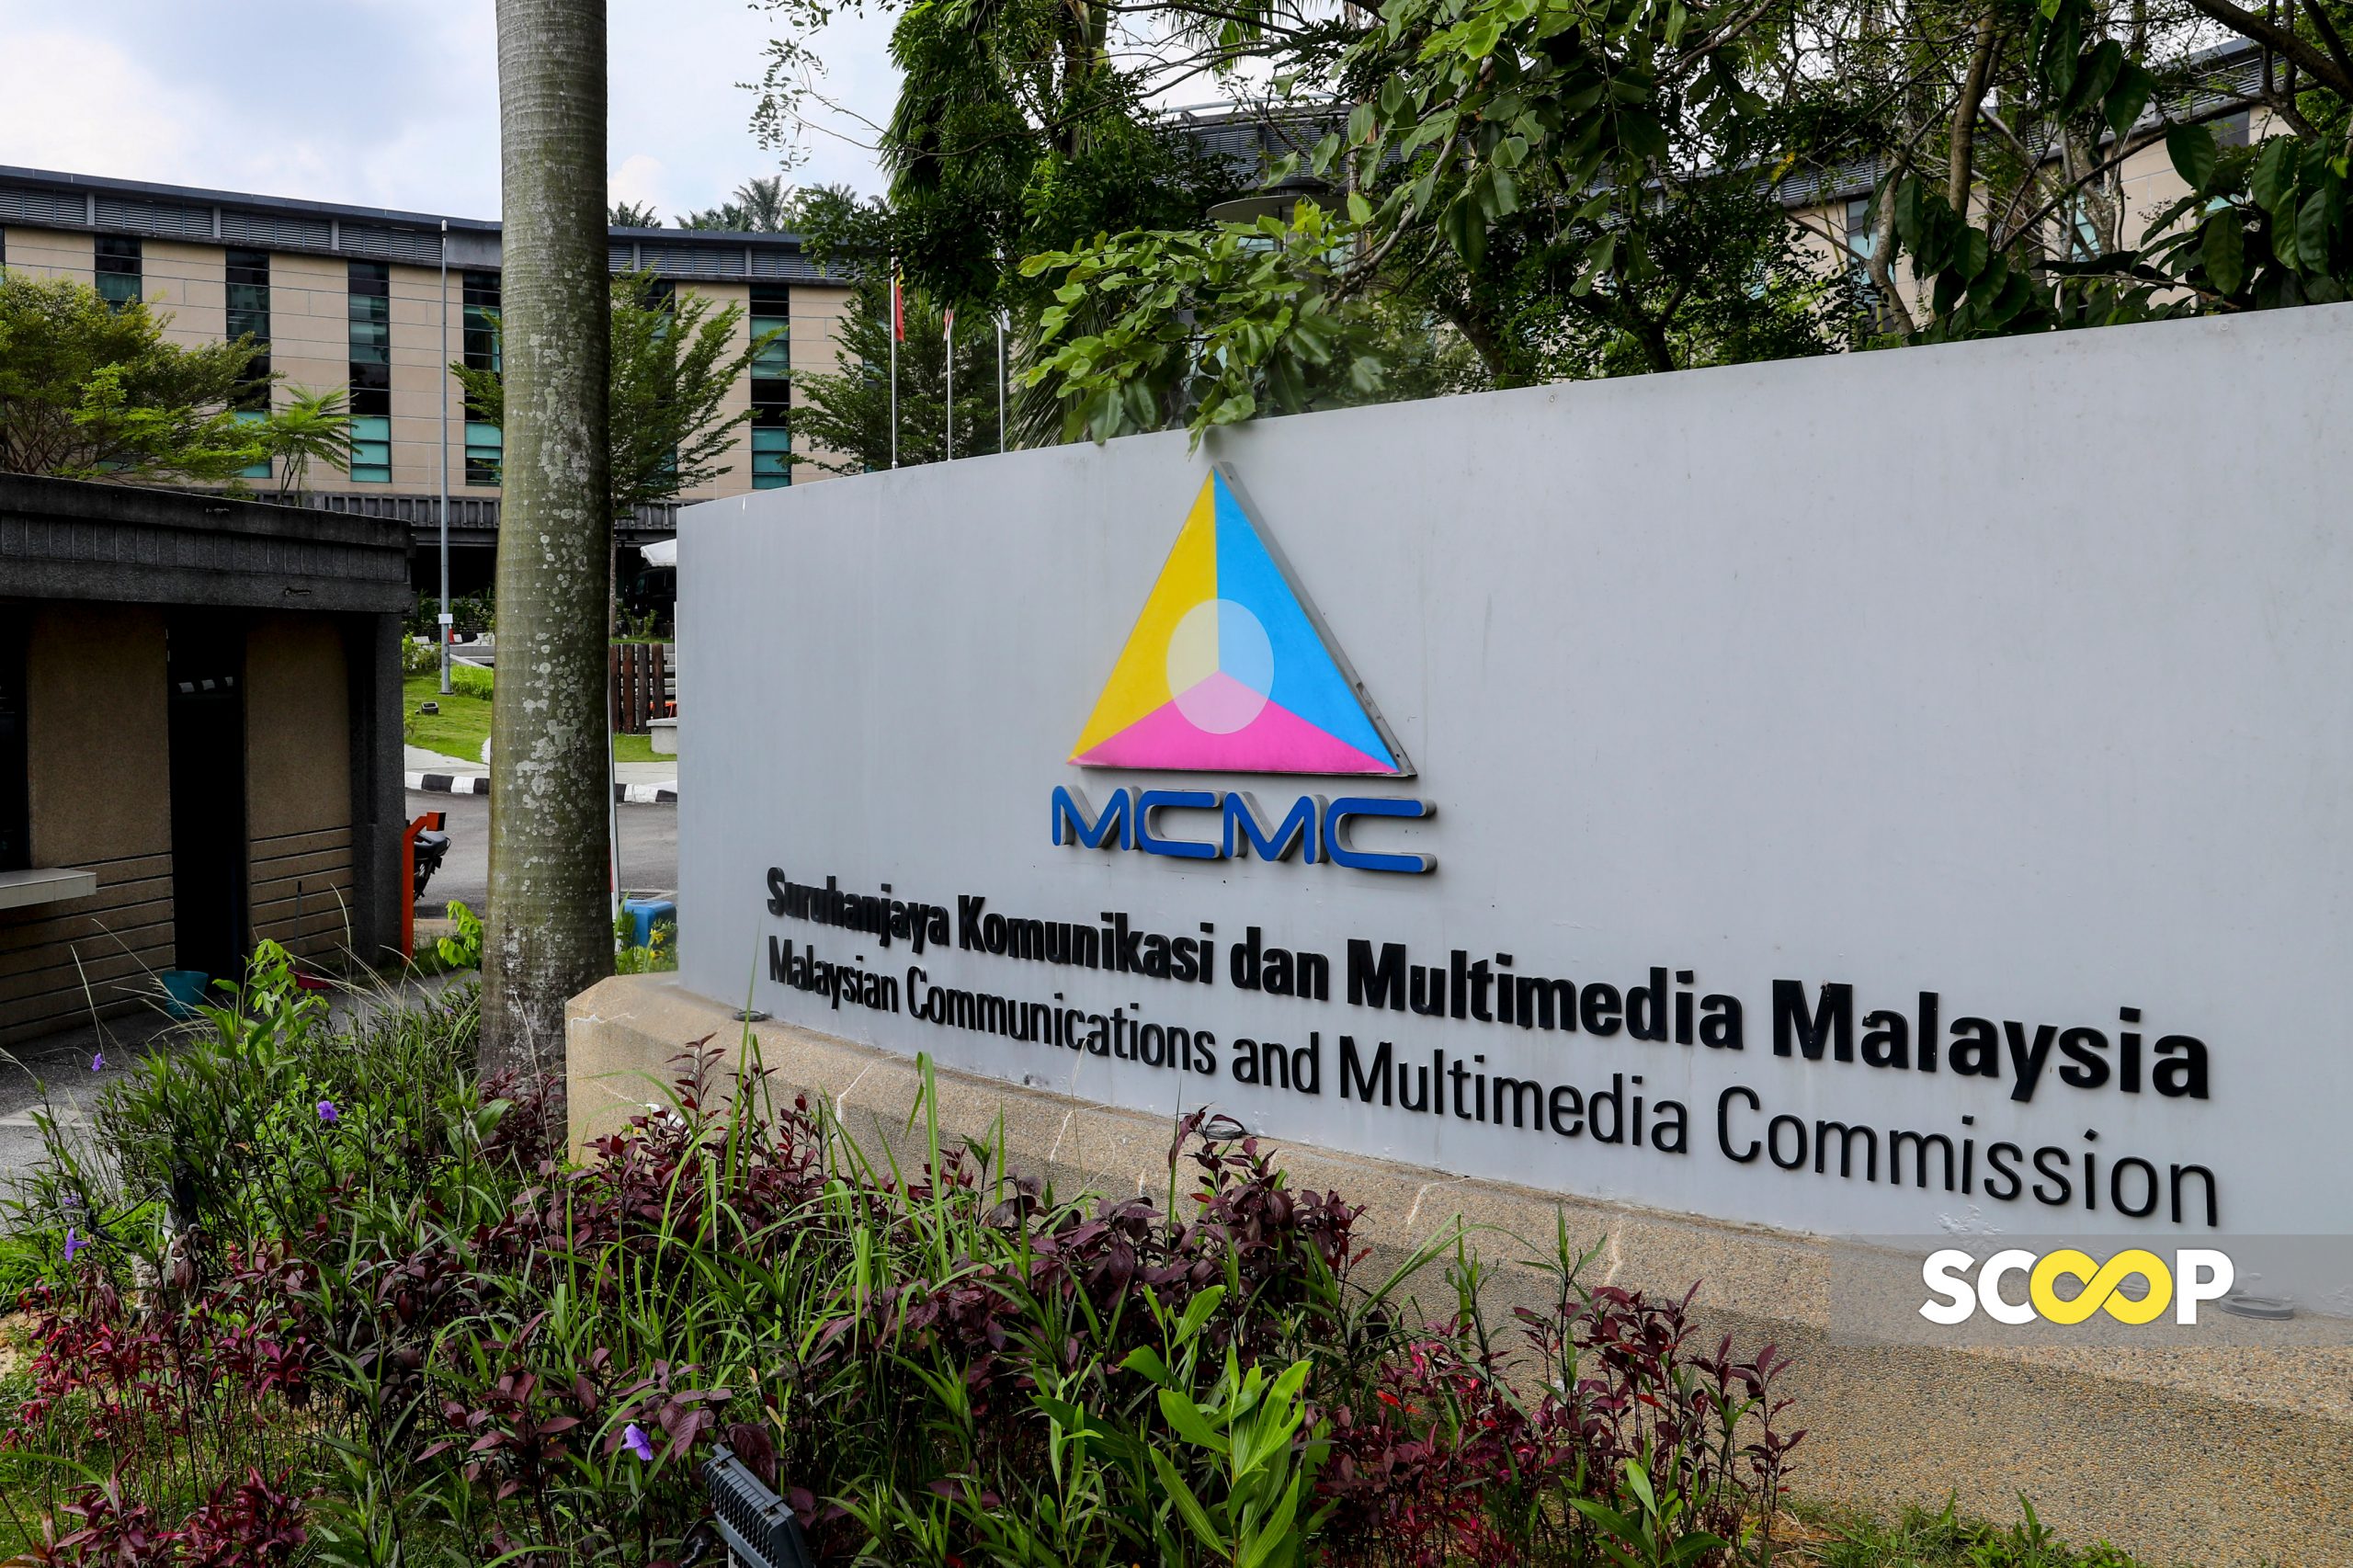 MCMC committed to fighting misinformation, regulating media